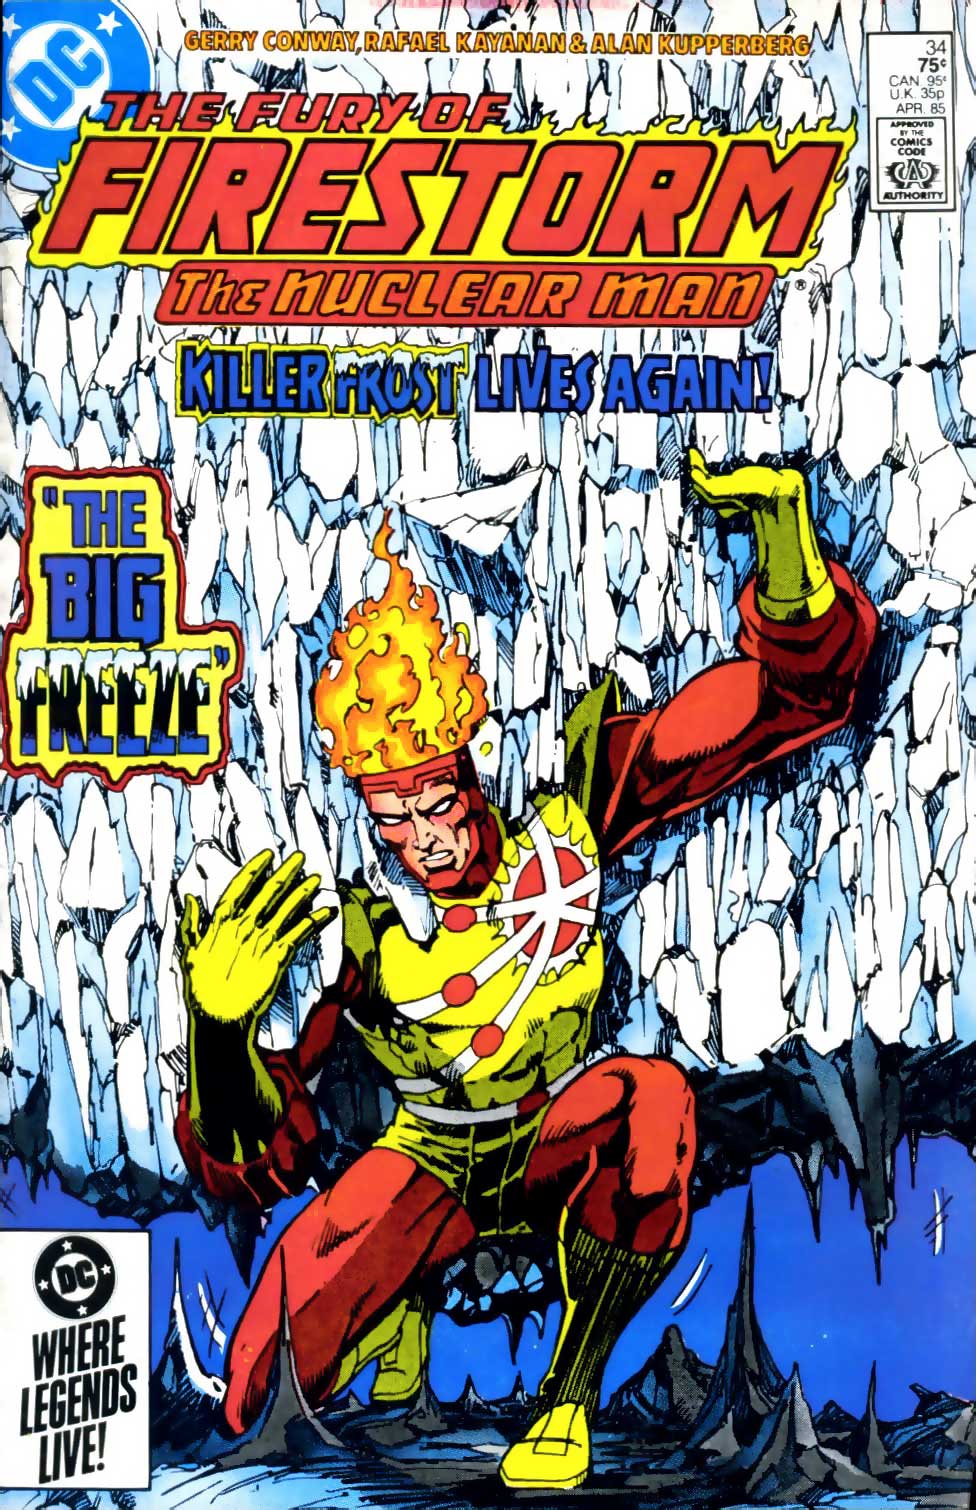 Fury of Firestorm #34 cover by Rafael Kayanan and Dick Giordano!